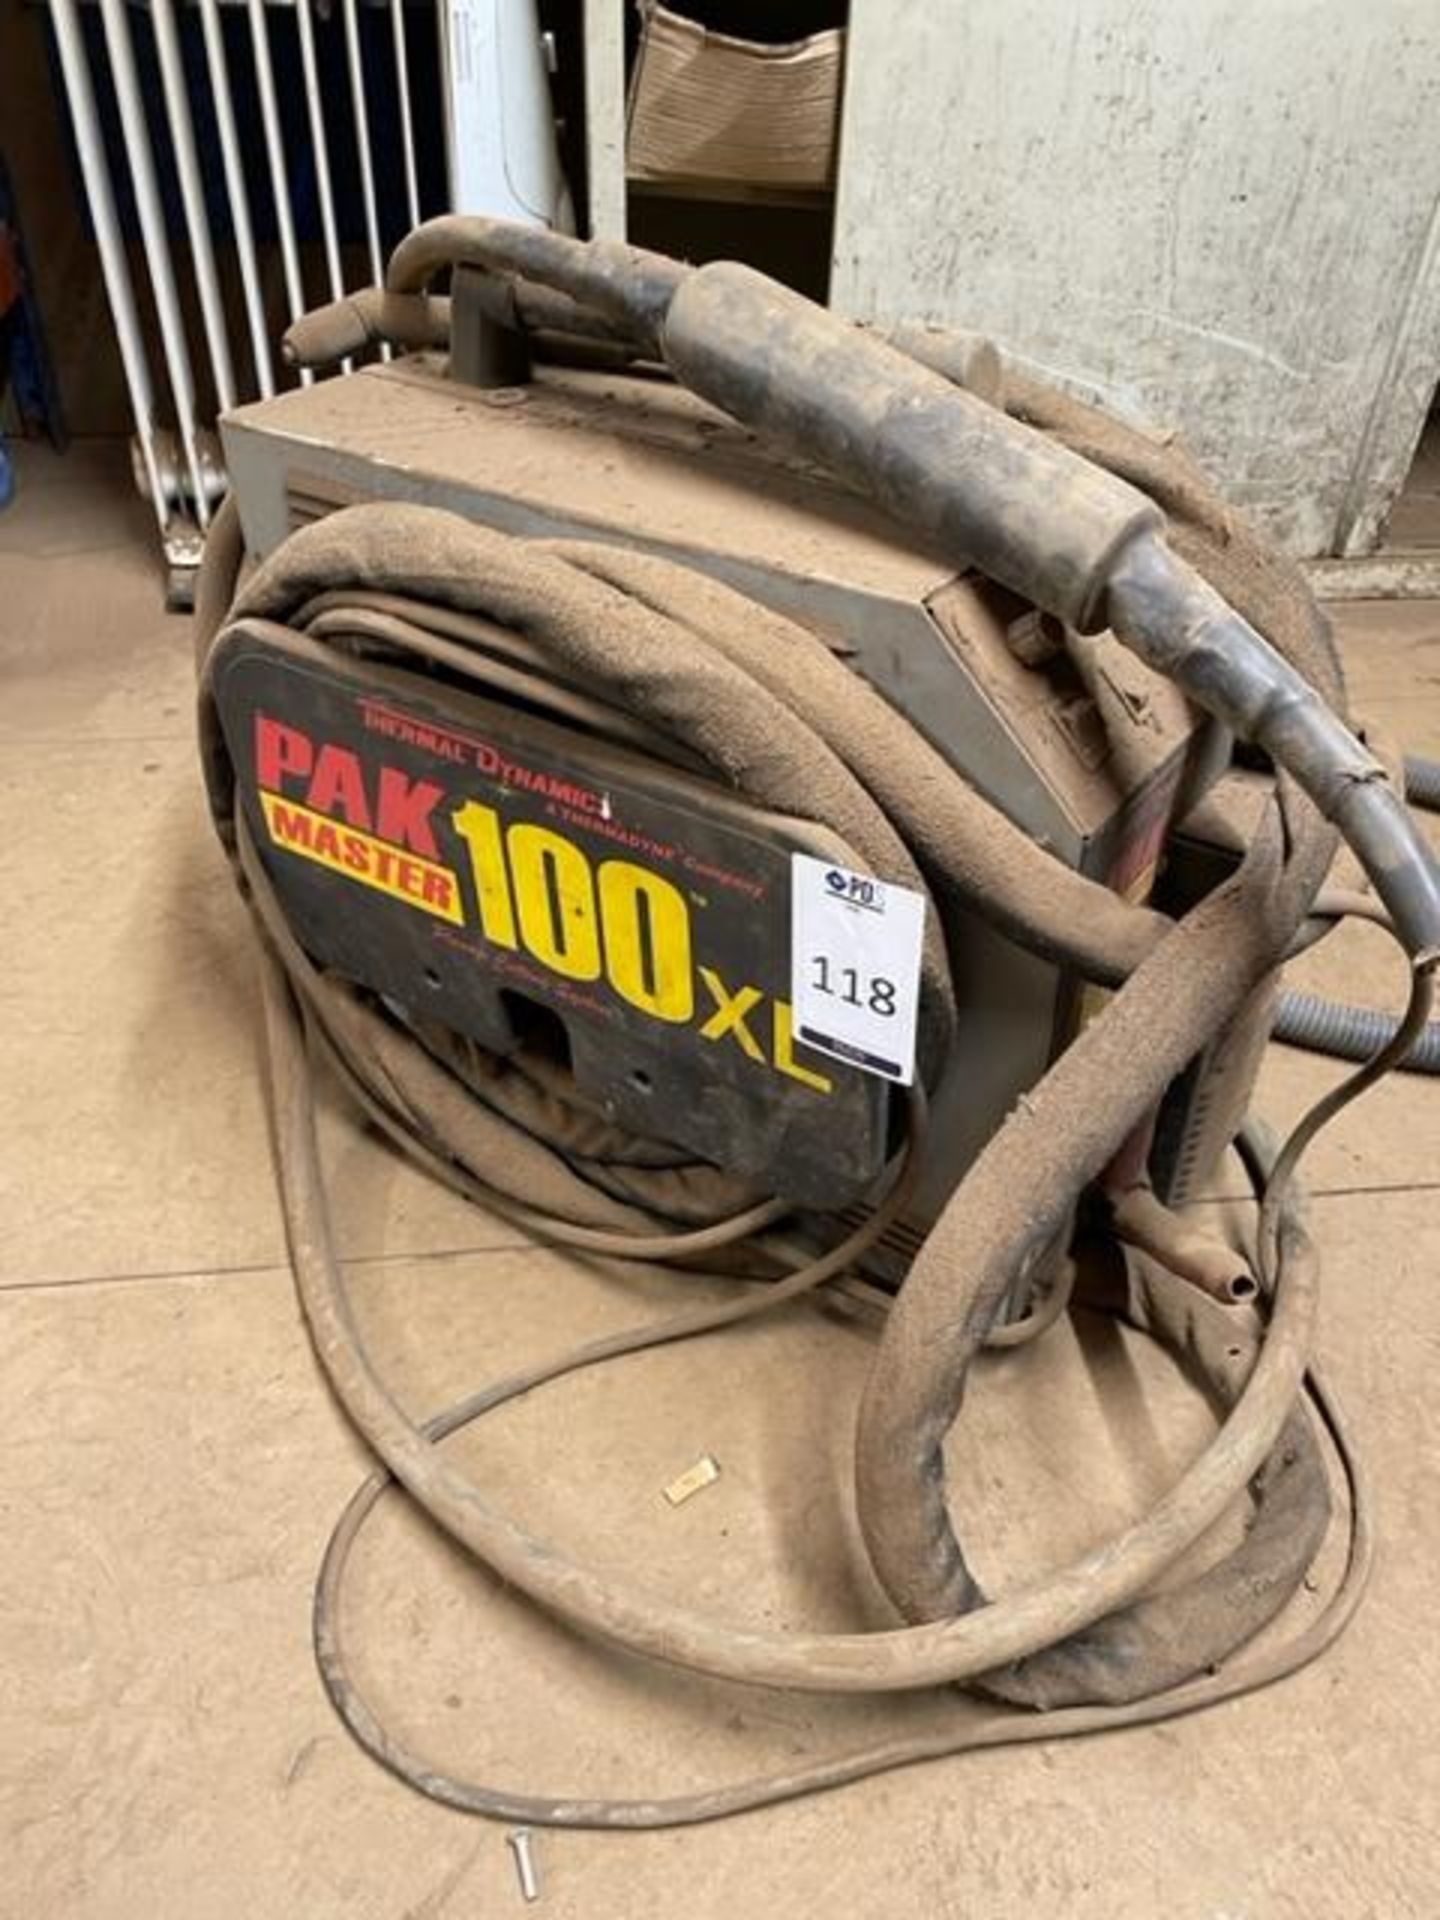 Thermal Dynamics Pakmaster 100XL Plasma Cutter (Location: Toddington, Beds. Please Refer to